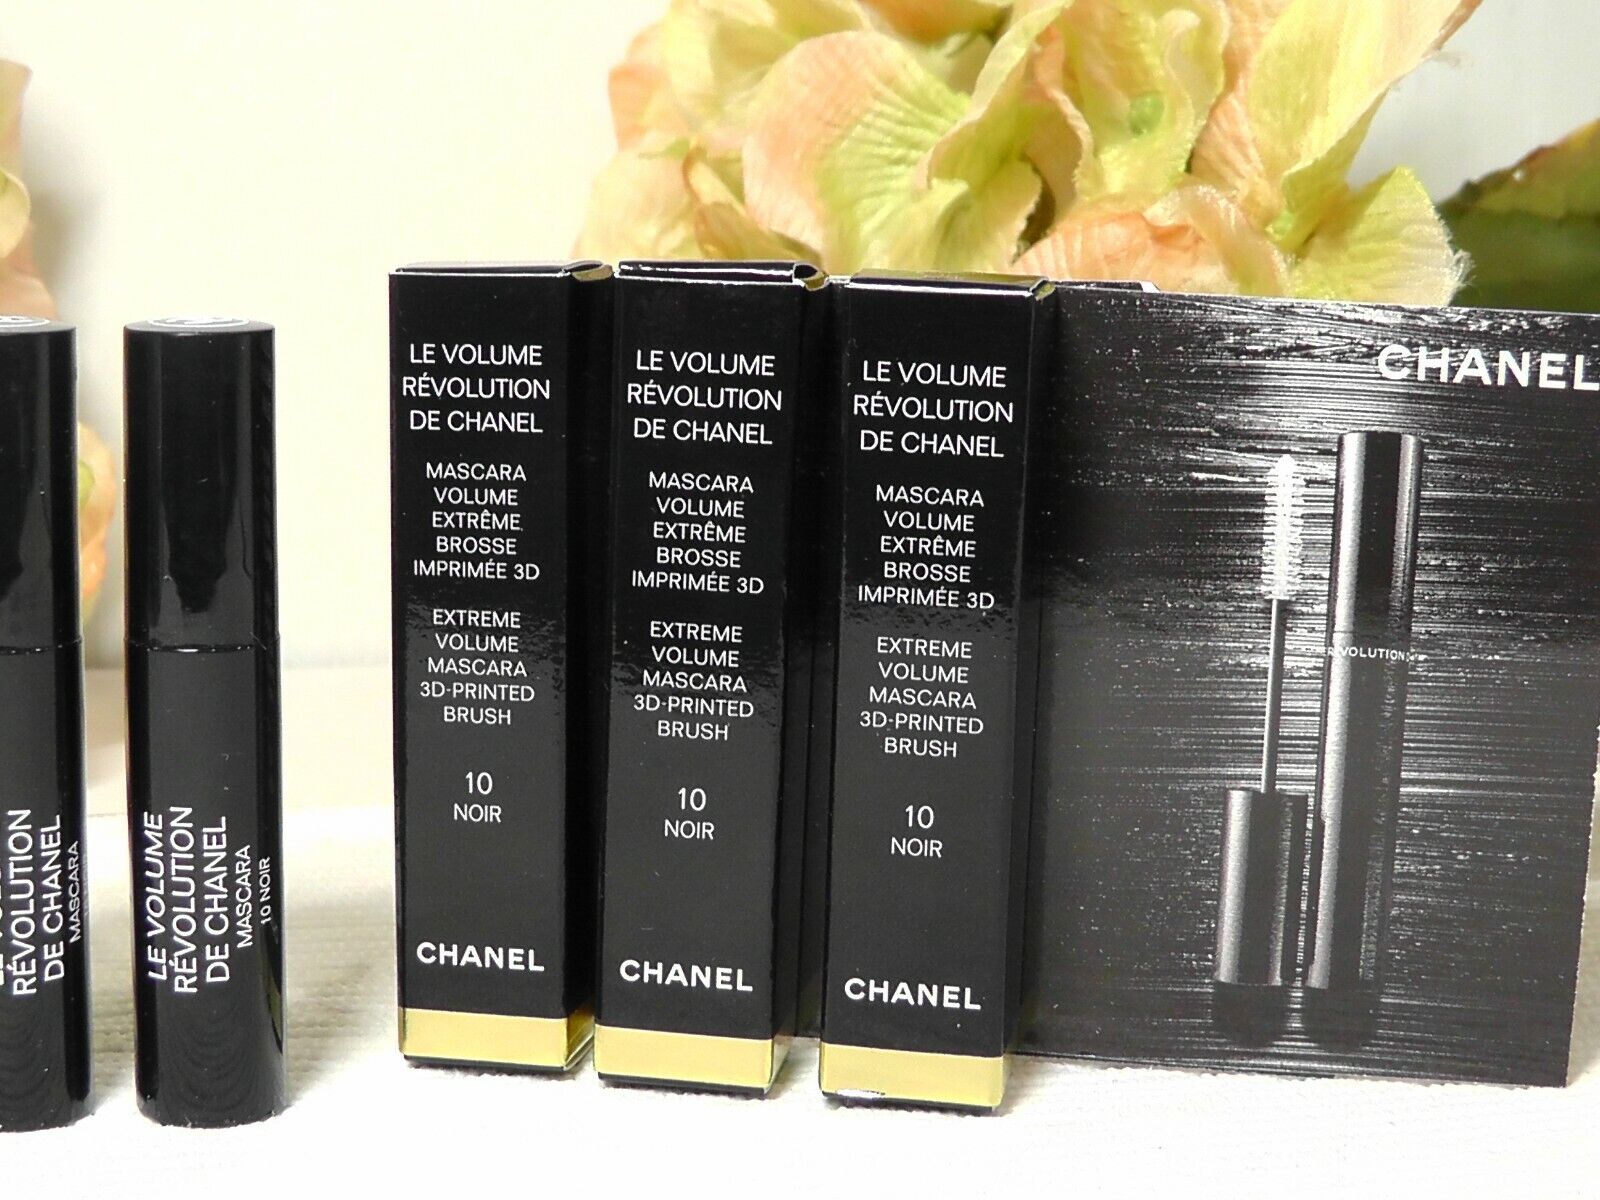 Chanel introduces their new winter makeup collection!